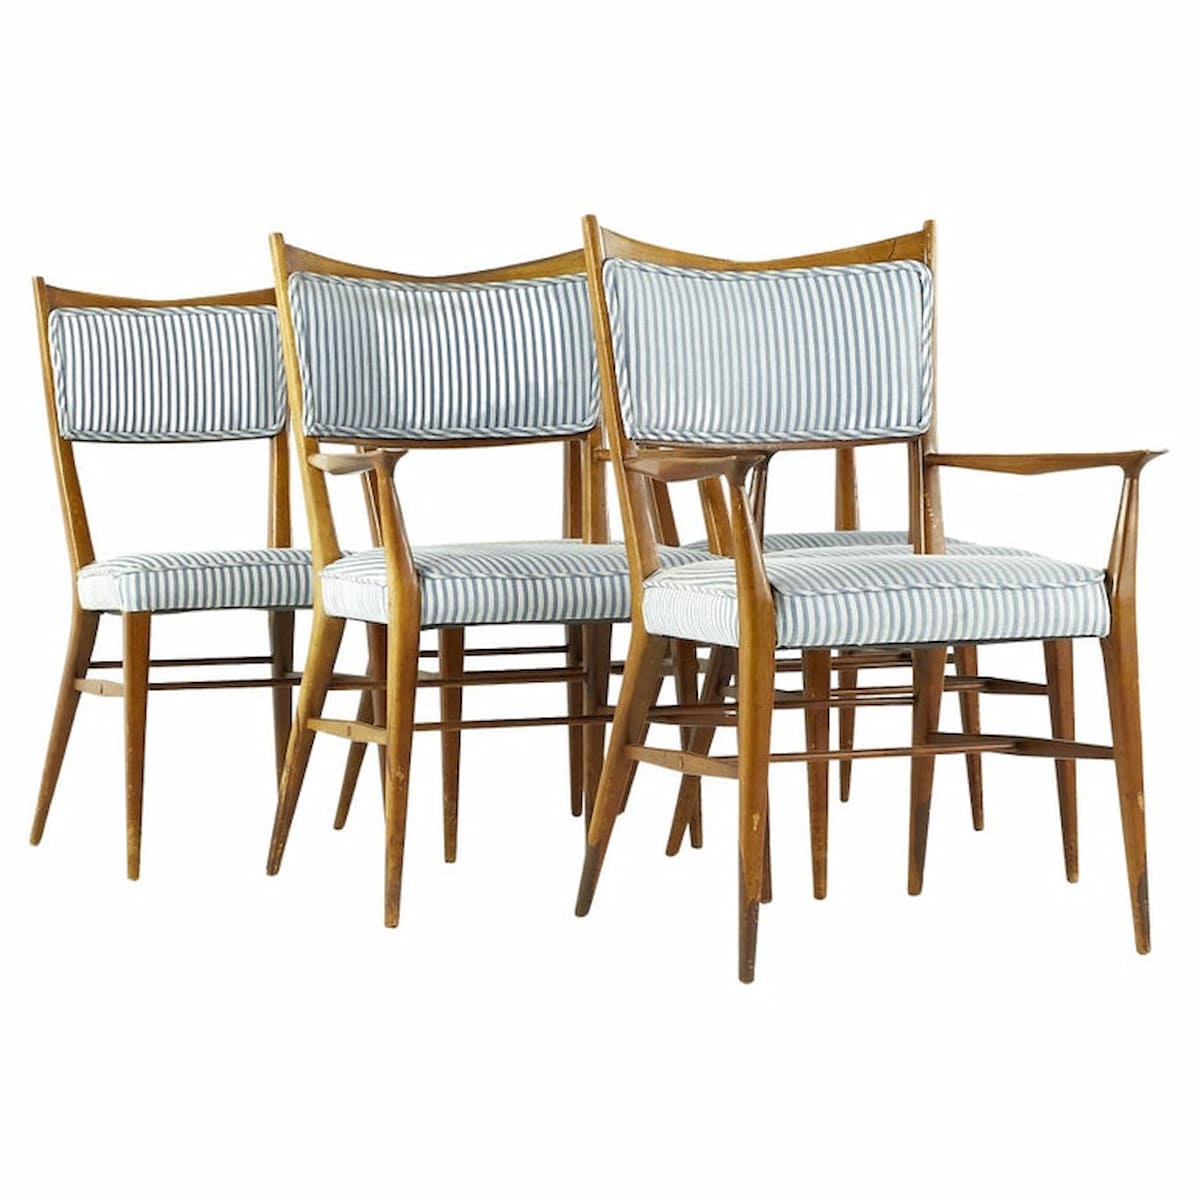 Paul Mccobb for Calvin's Irwin Collection Mid Century Dining Chairs - Set of 6